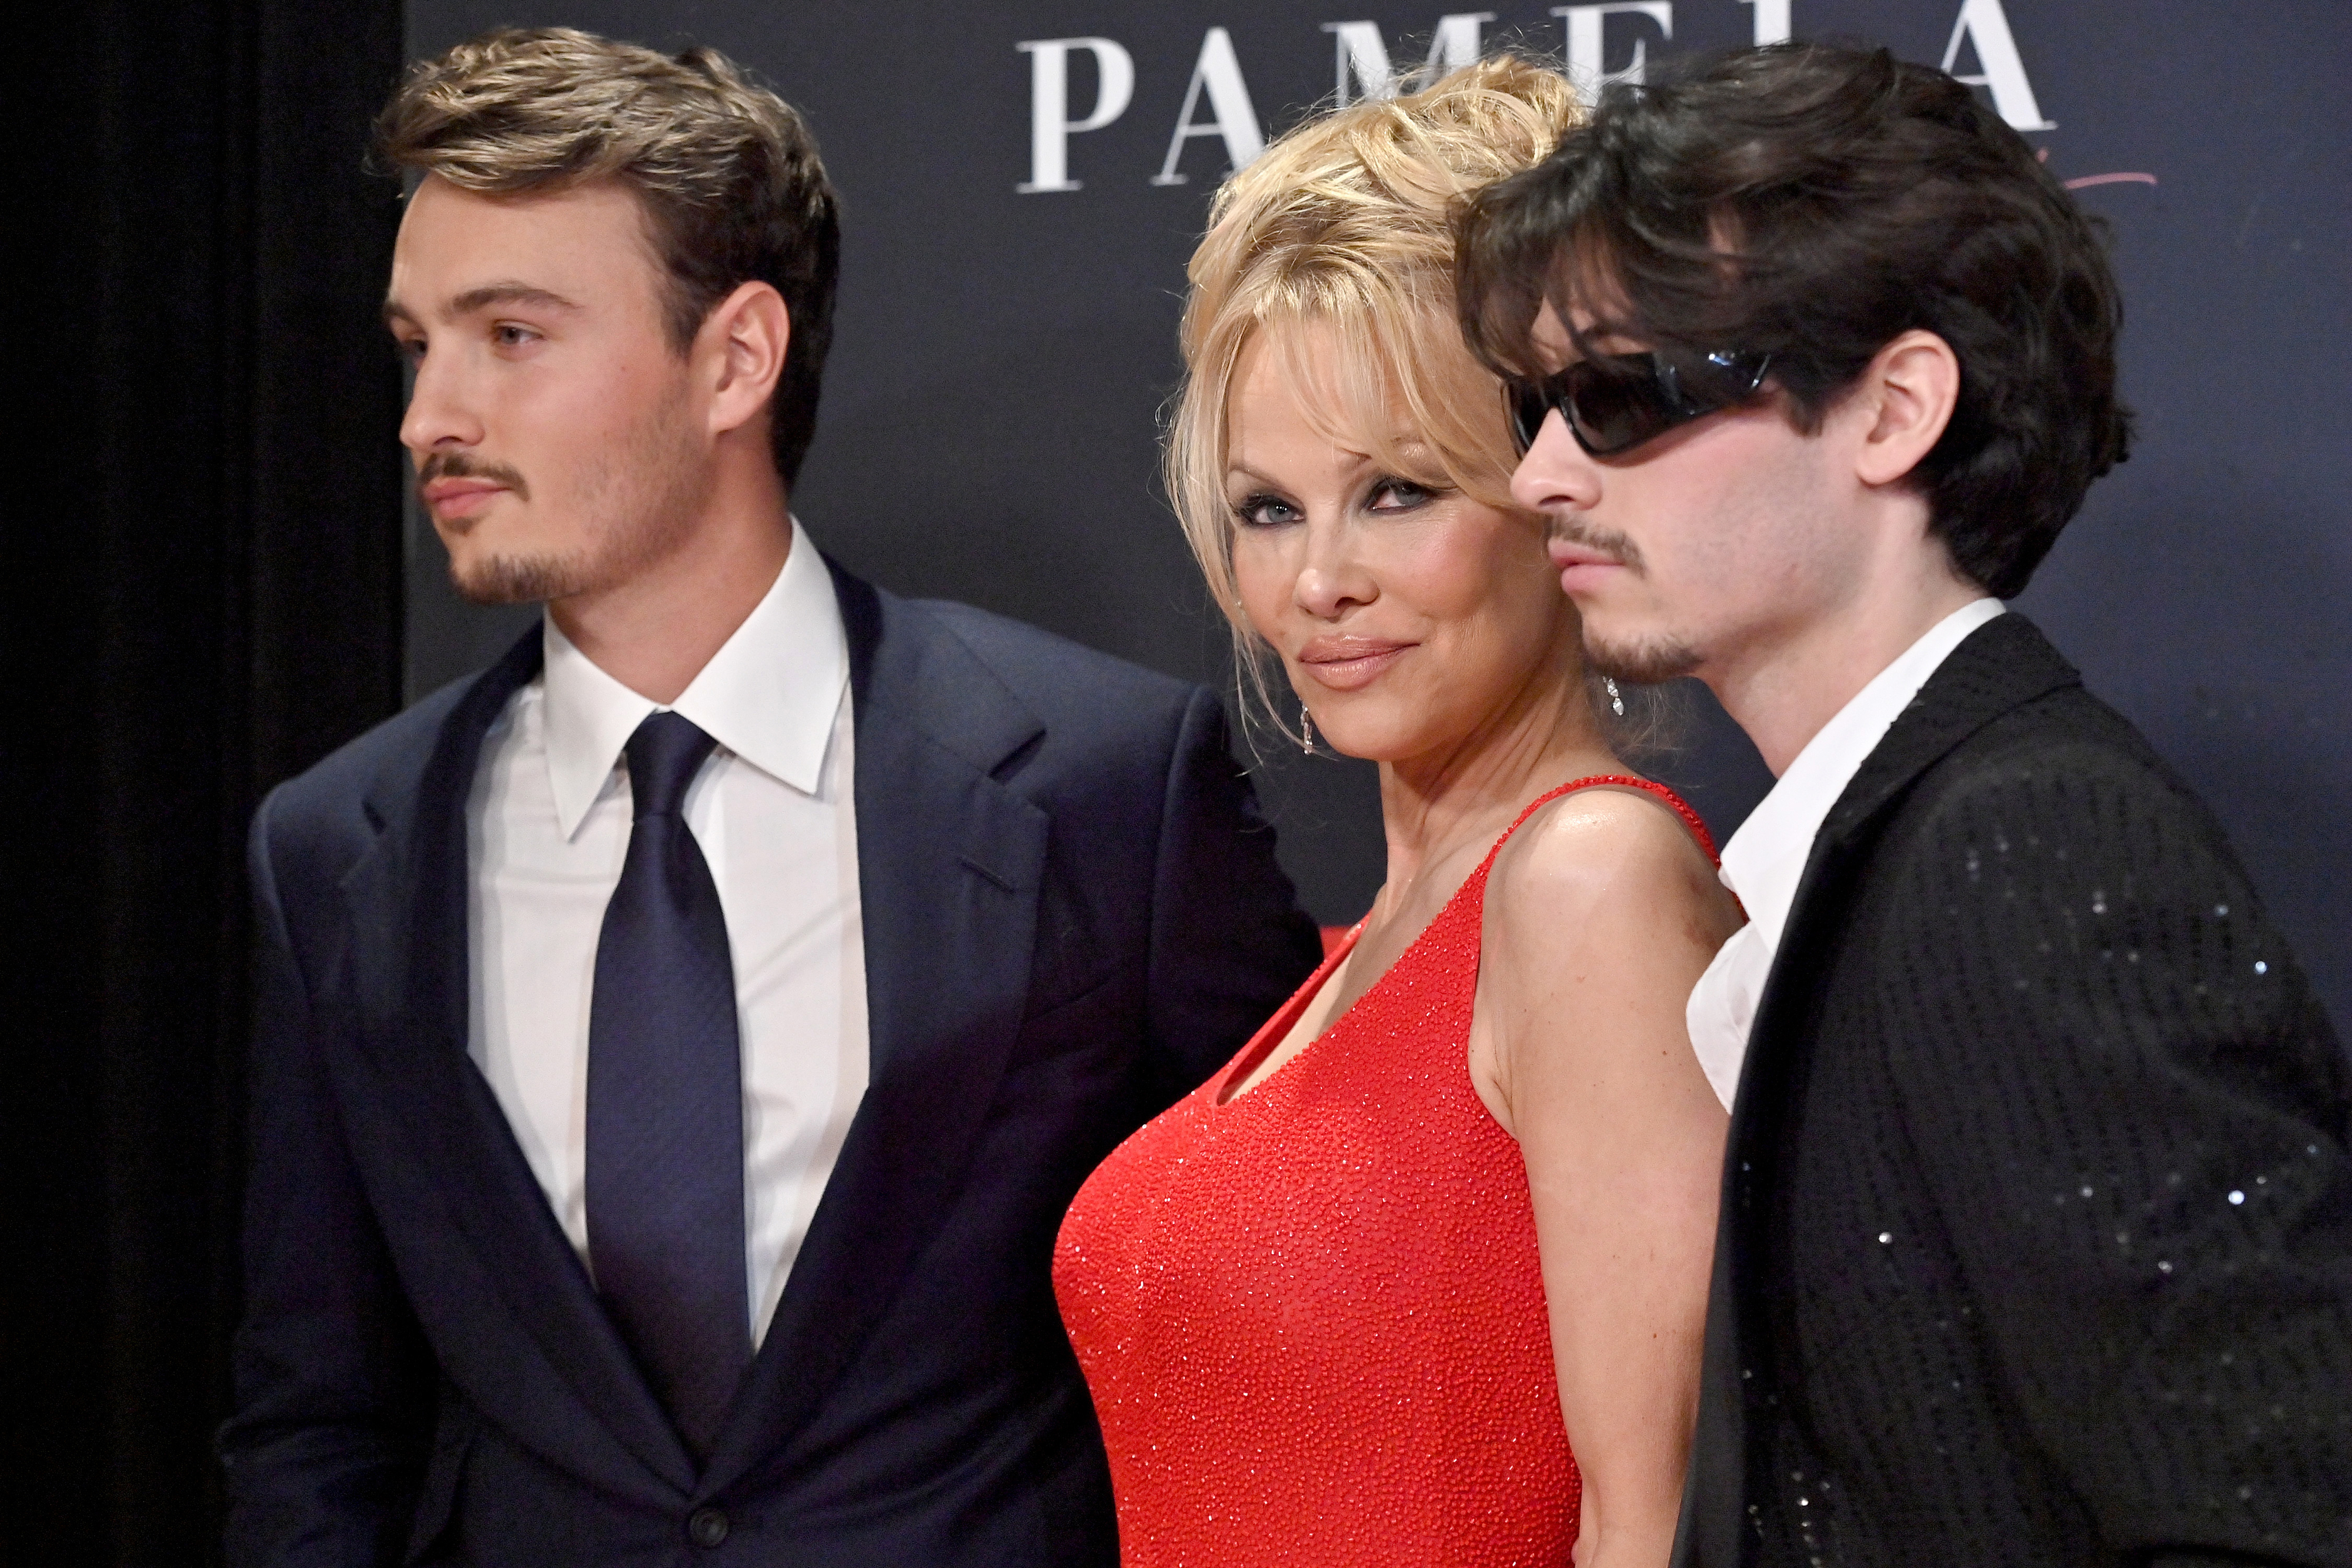 Pamela smiles on the red carpet with her adult sons flanking her